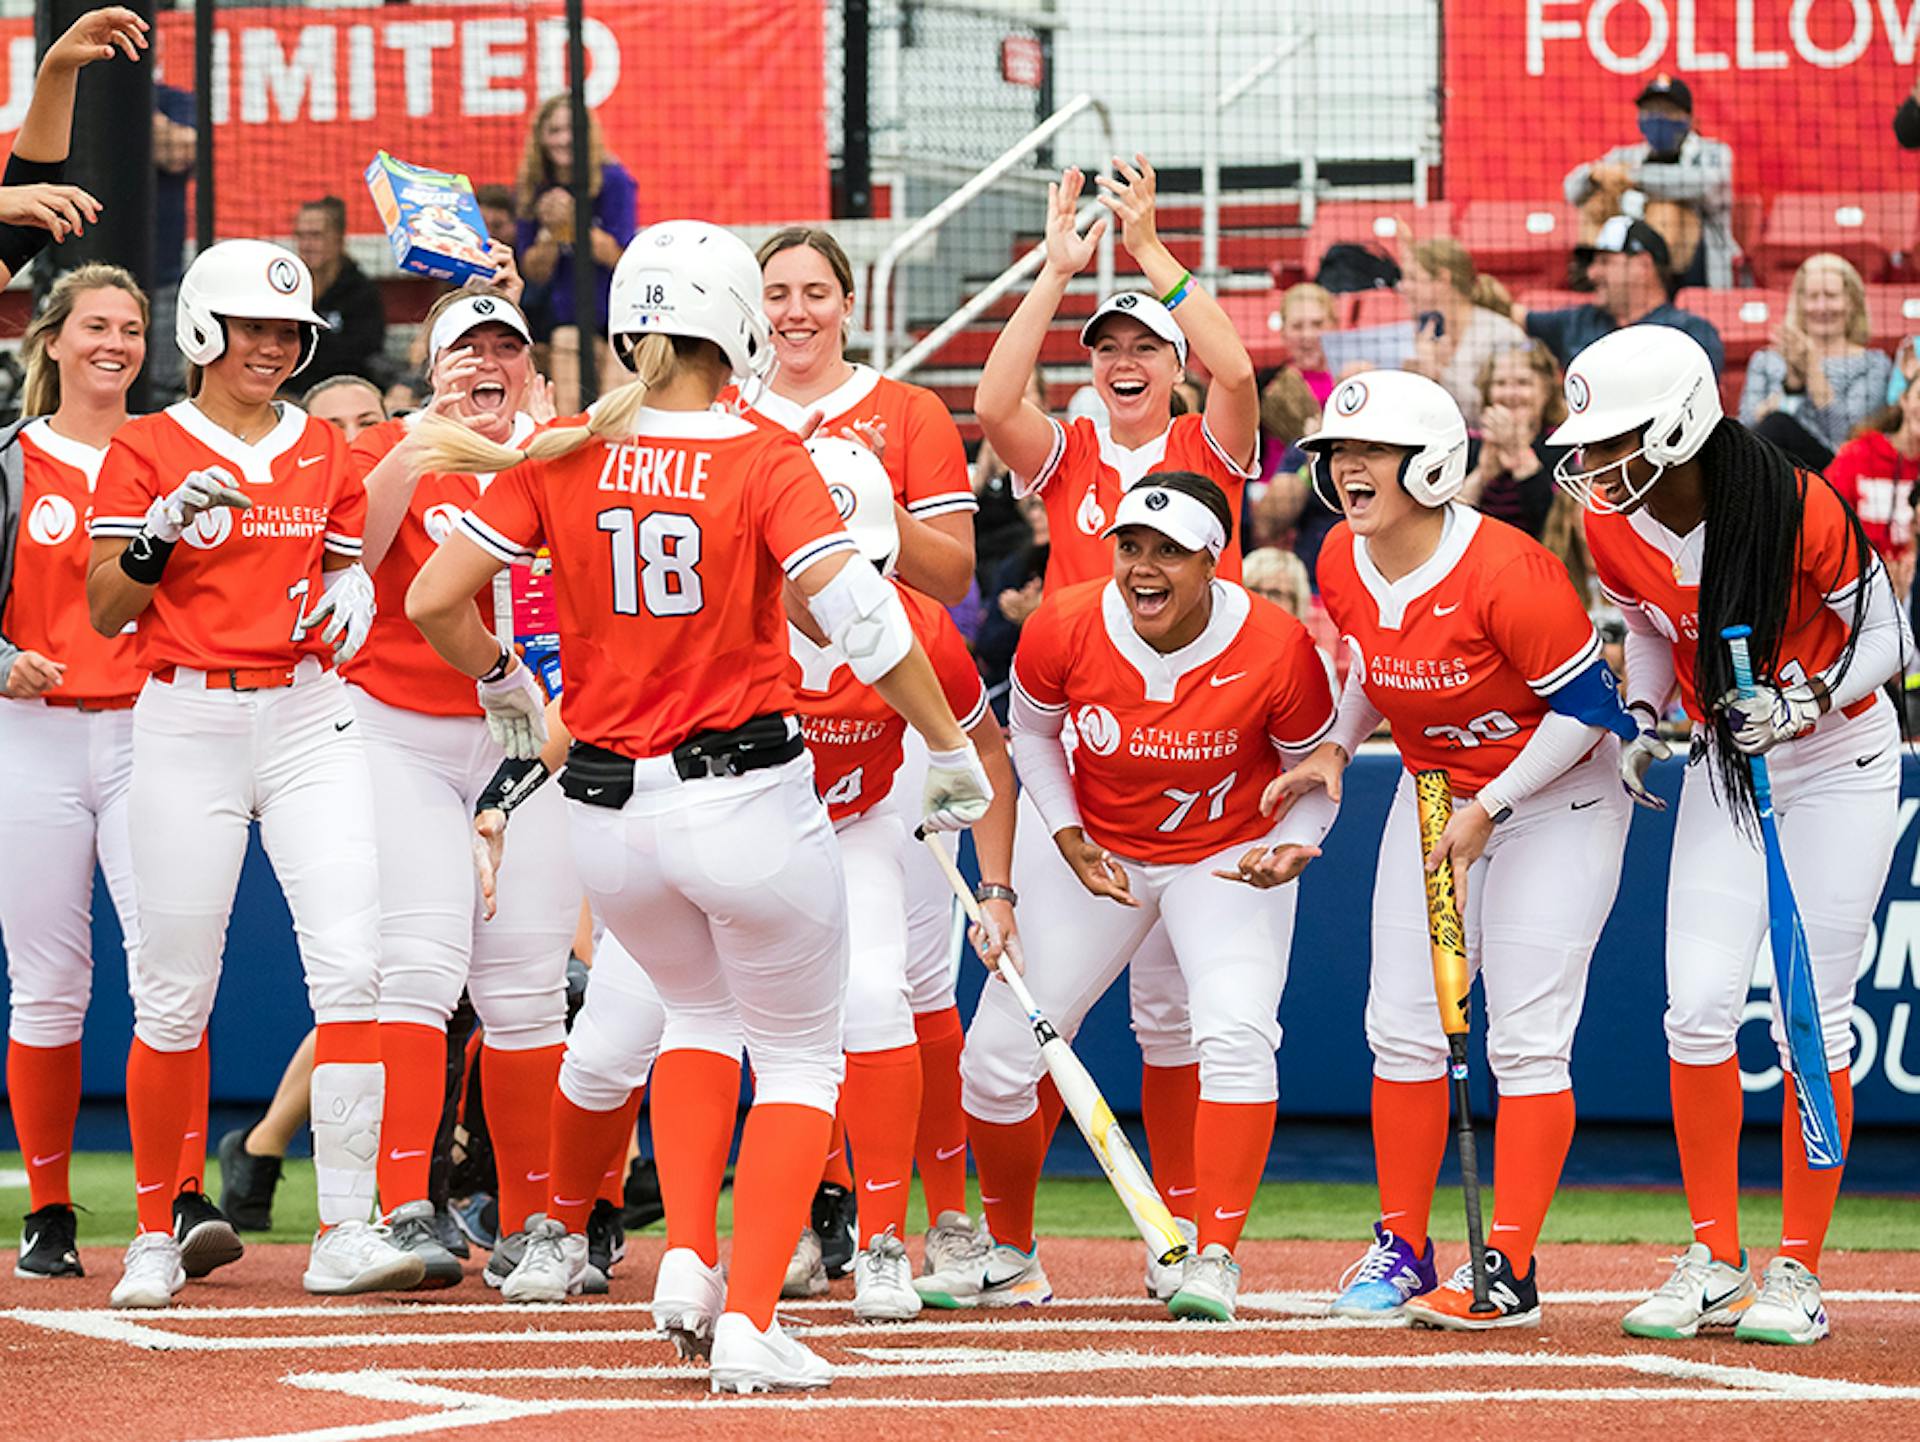 Best softball uniforms voting continues